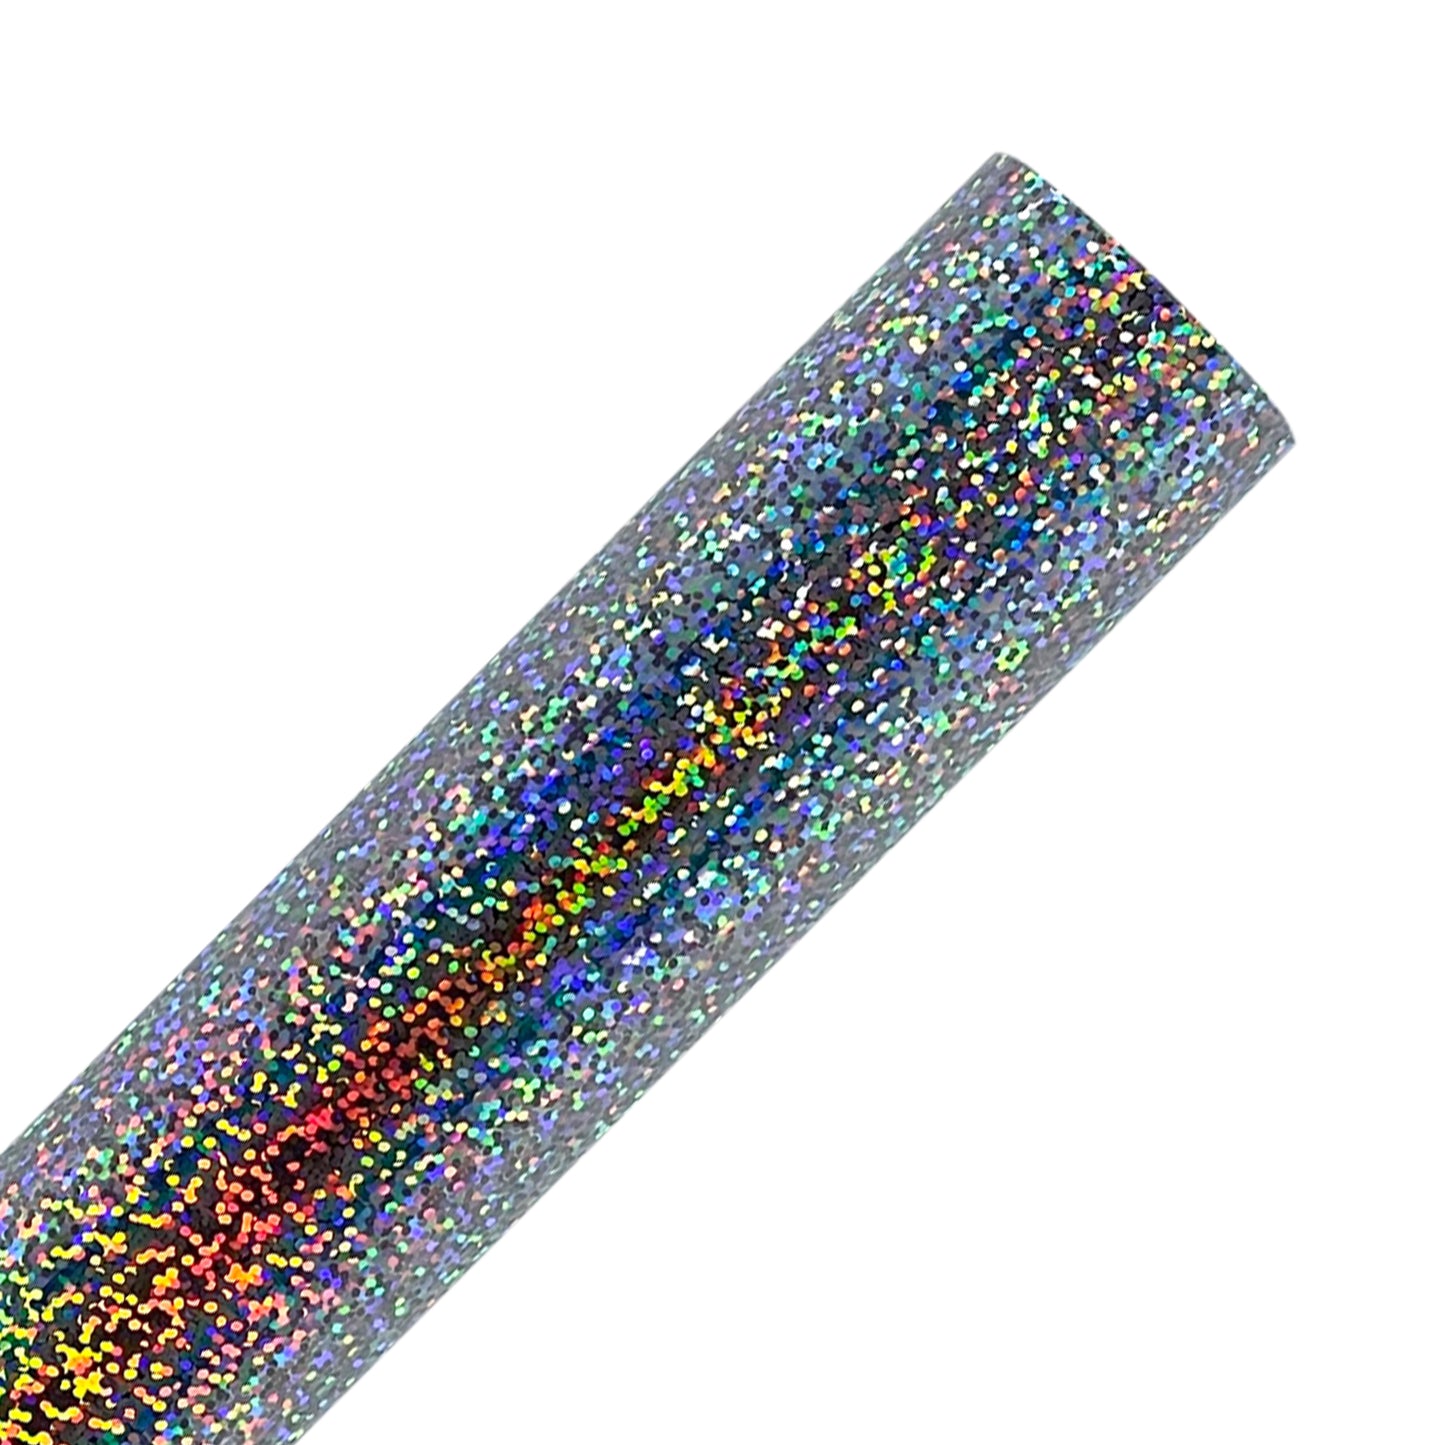 Silver Holographic Sparkle Heat Transfer Vinyl Rolls By Craftables